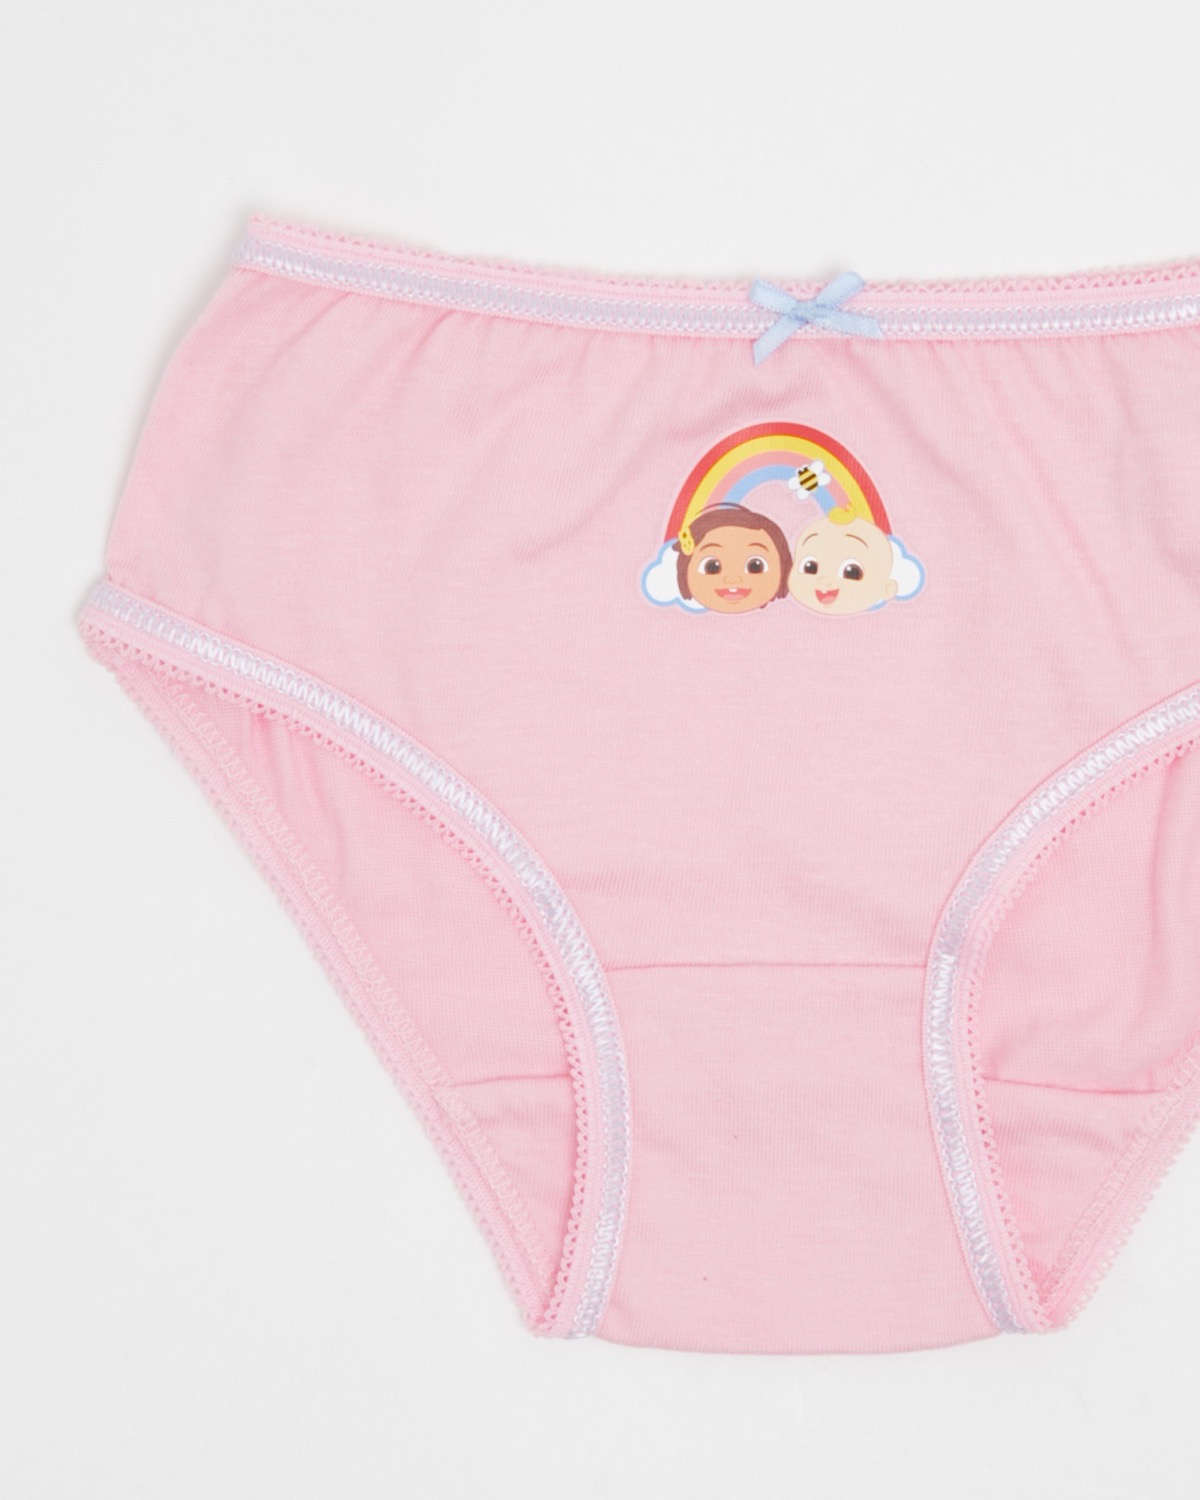 Cocomelon Briefs - Pack Of 3 (2-5 years)